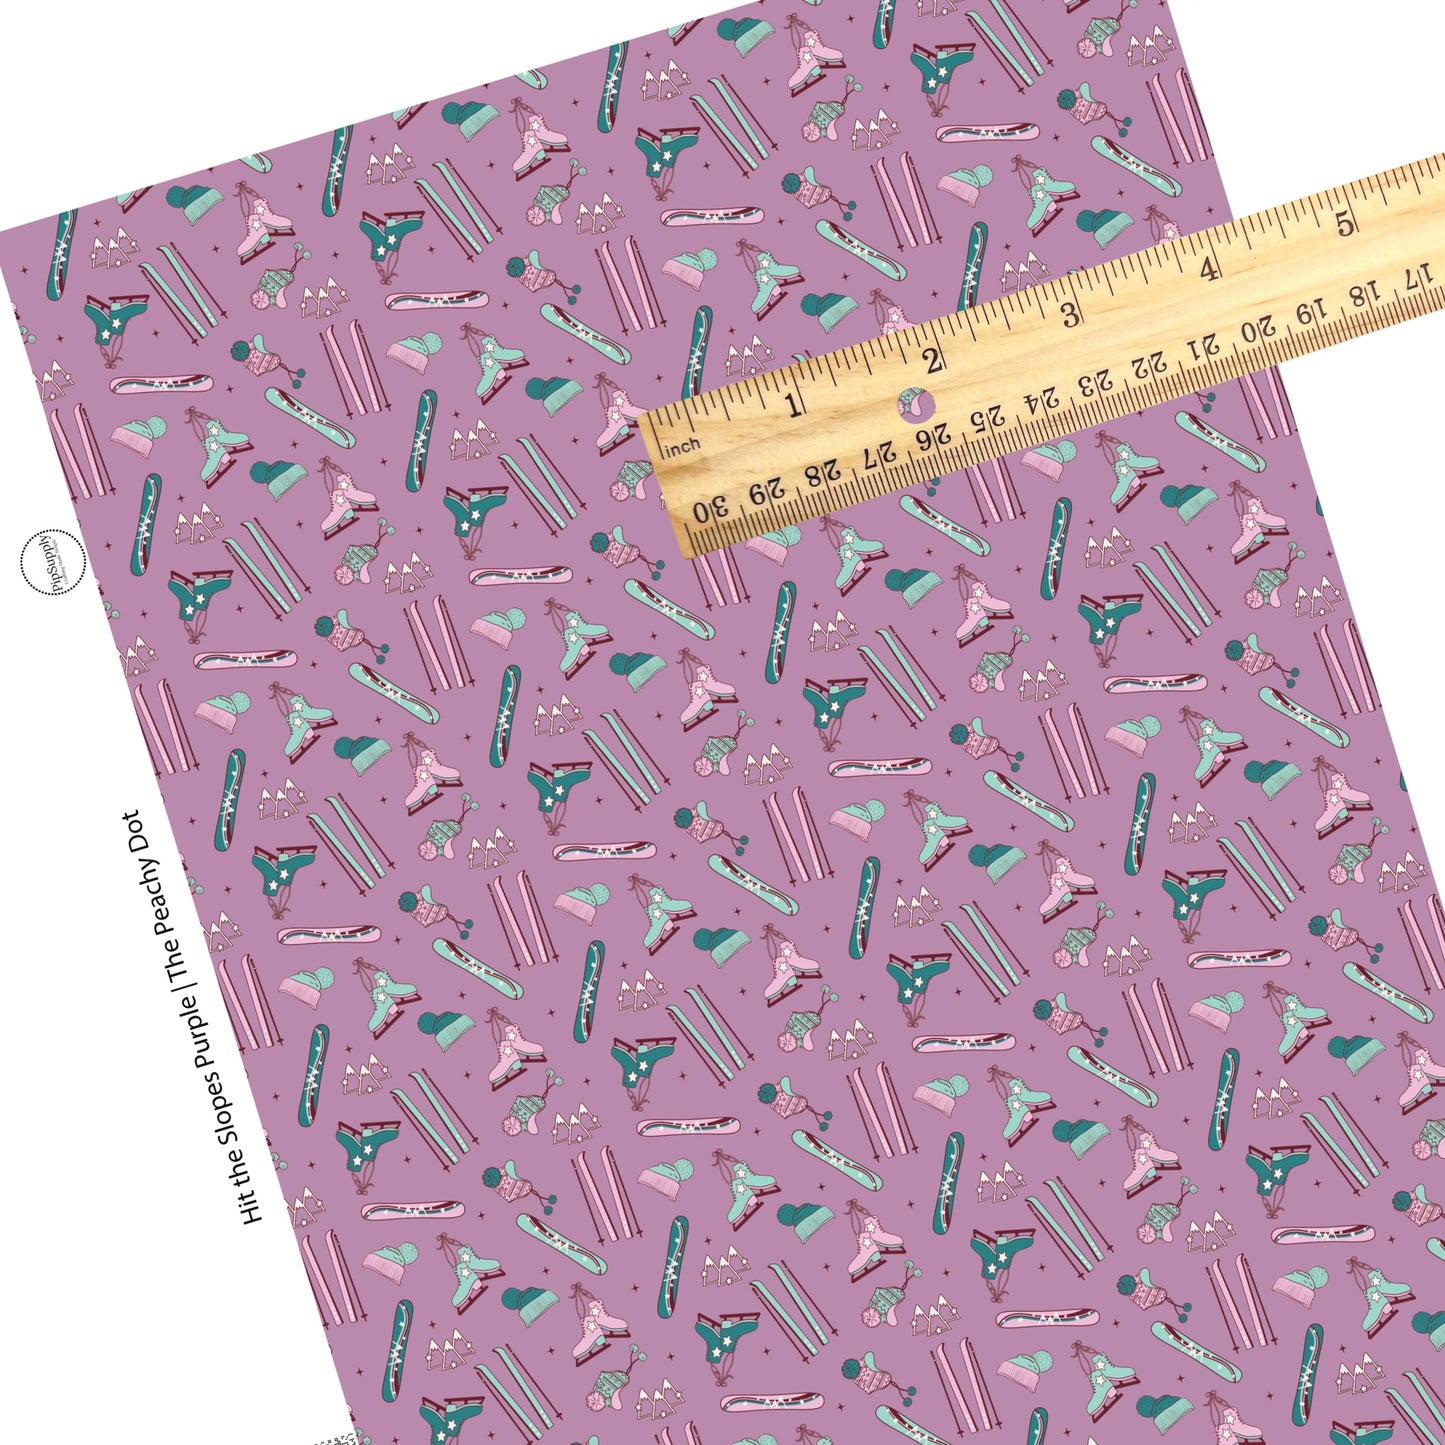 Skis and skates with stars on purple faux leather sheets